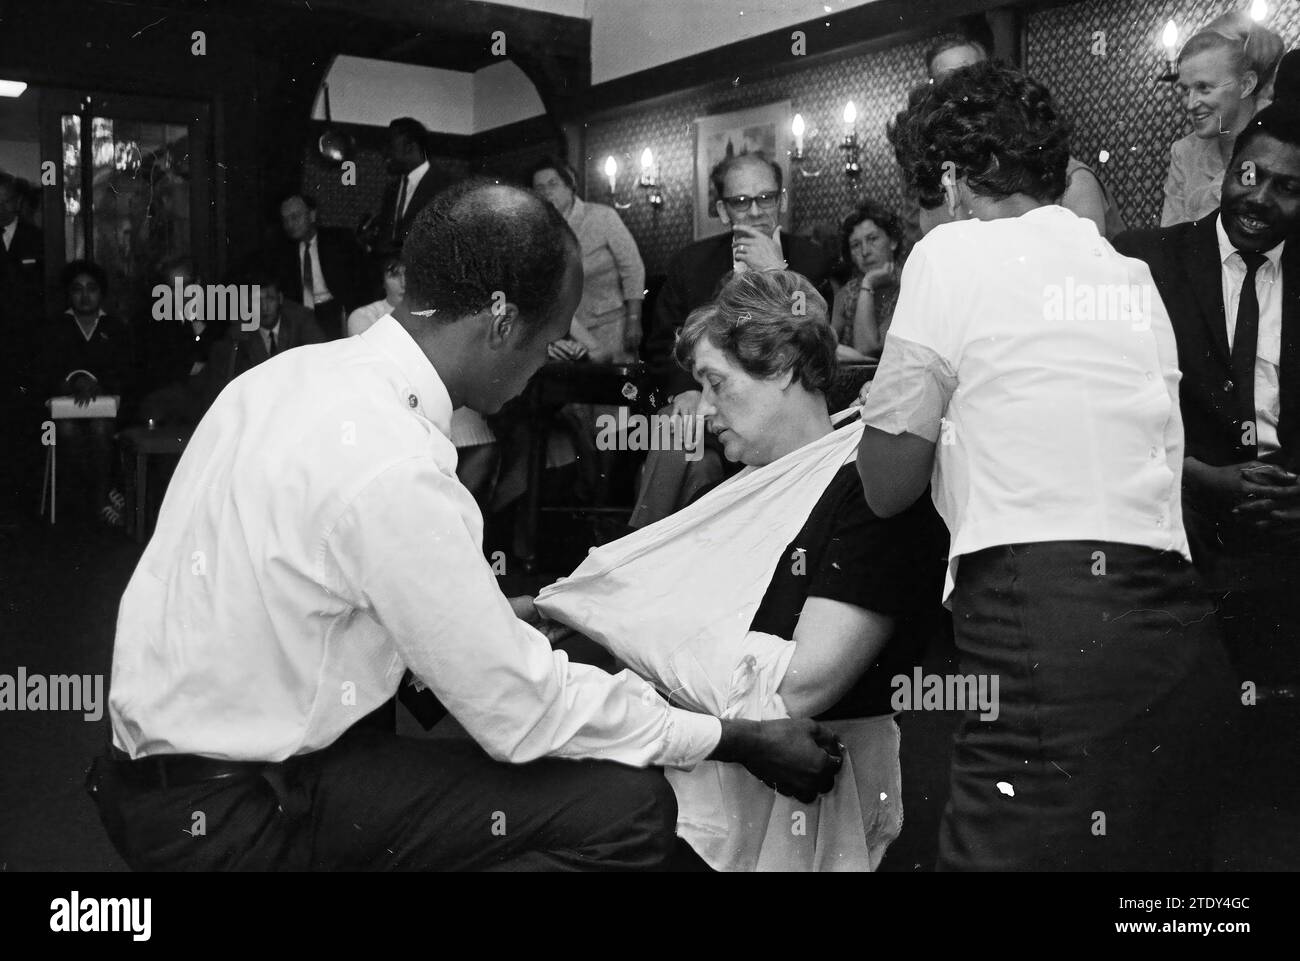 First aid competition in Wienerwald restaurant, 04-06-1968, Whizgle News from the Past, Tailored for the Future. Explore historical narratives, Dutch The Netherlands agency image with a modern perspective, bridging the gap between yesterday's events and tomorrow's insights. A timeless journey shaping the stories that shape our future. Stock Photo